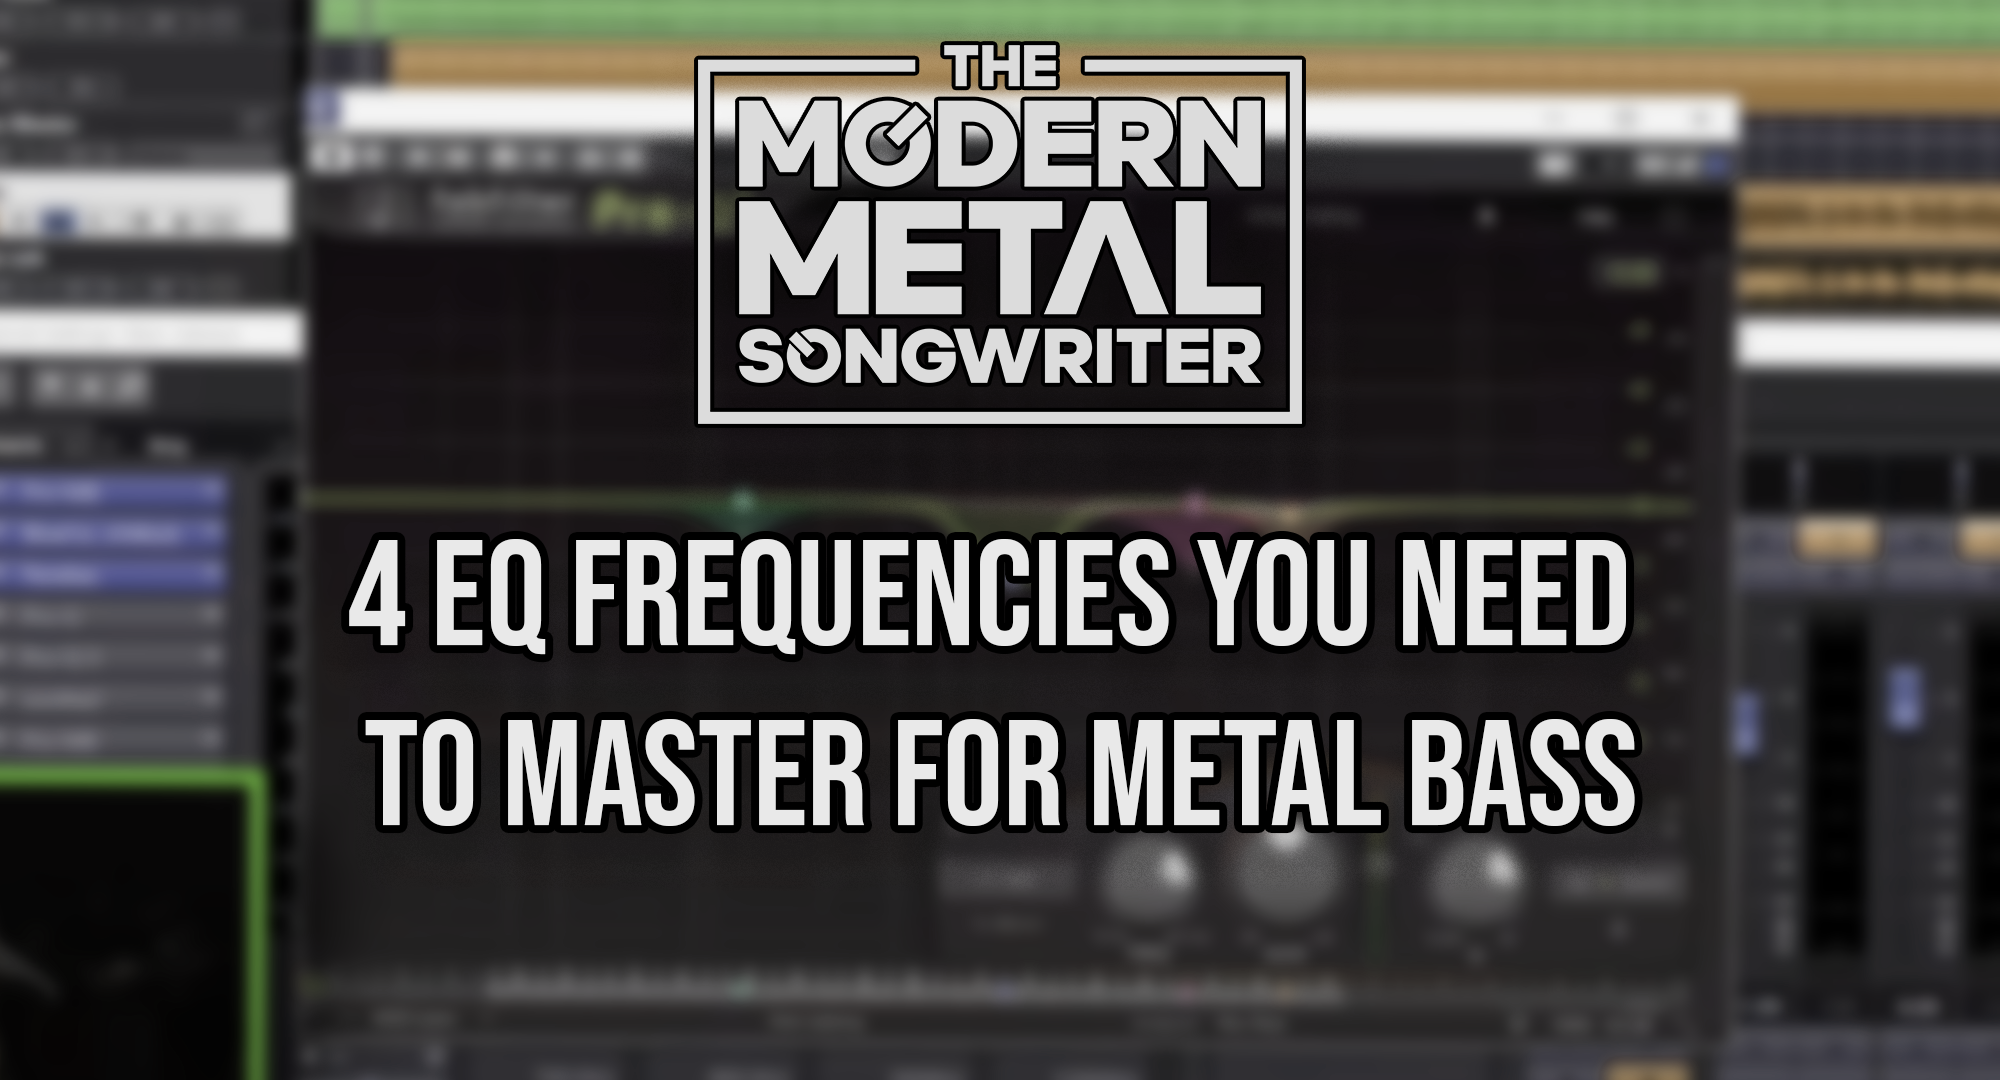 4-EQ-Frequencies-You-Need-to-Master-for-Metal-Bass ModernMetalSongwriter graphic